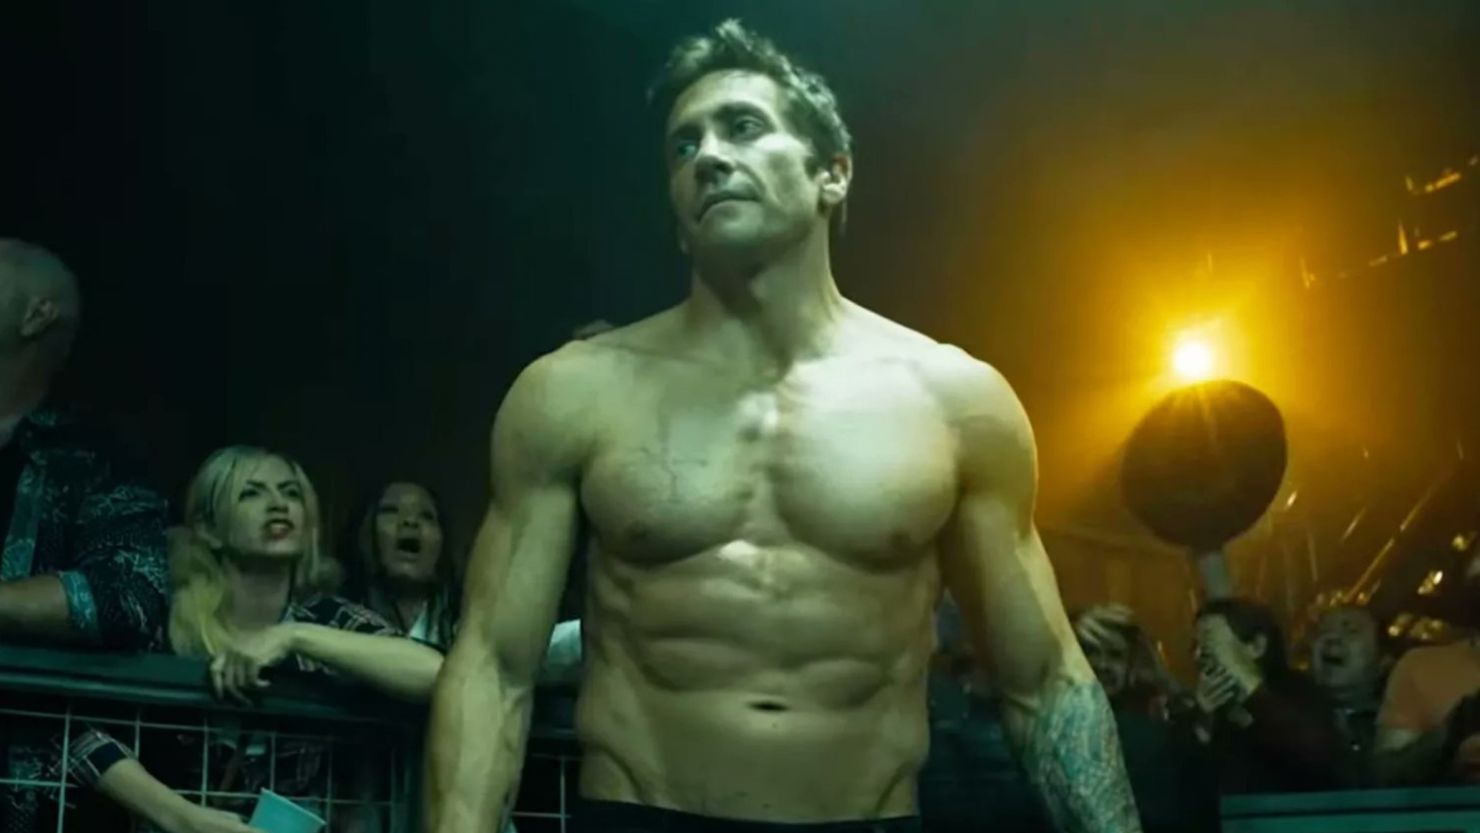 Jake Gyllenhaal is ripped in first look at remake of Patrick Swayze